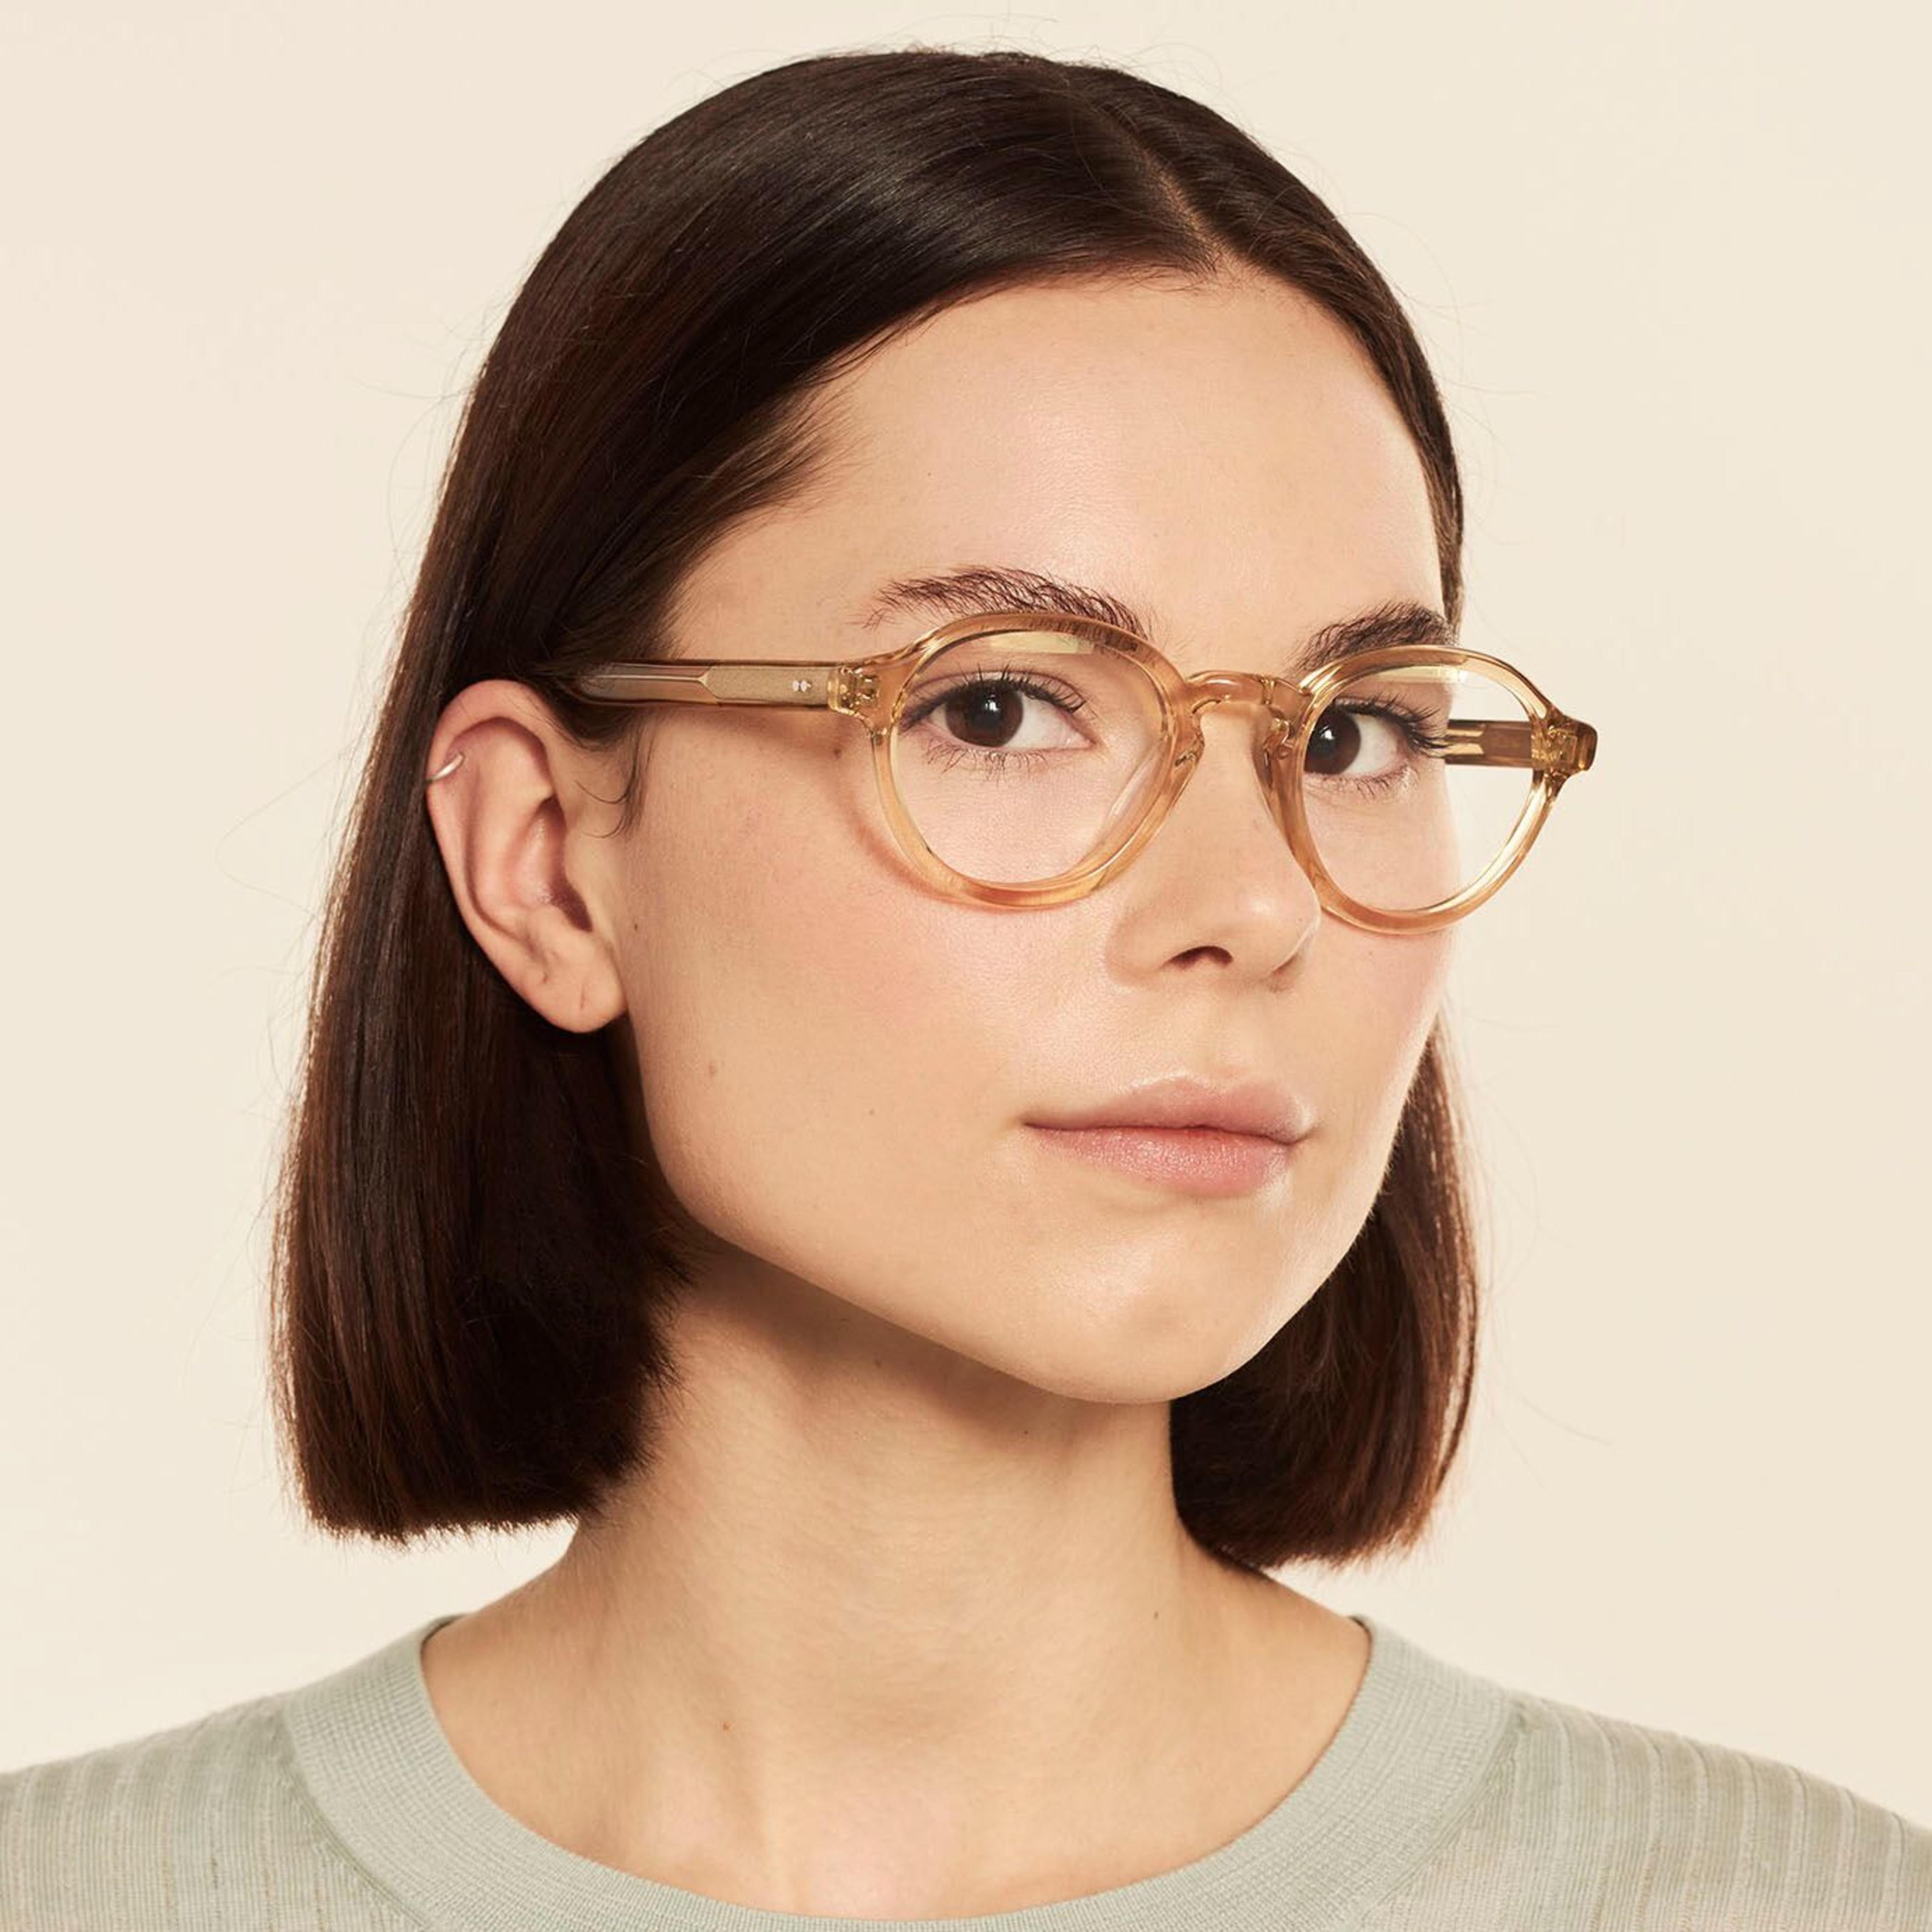 Ace & Tate Glasses | Round Acetate in Yellow